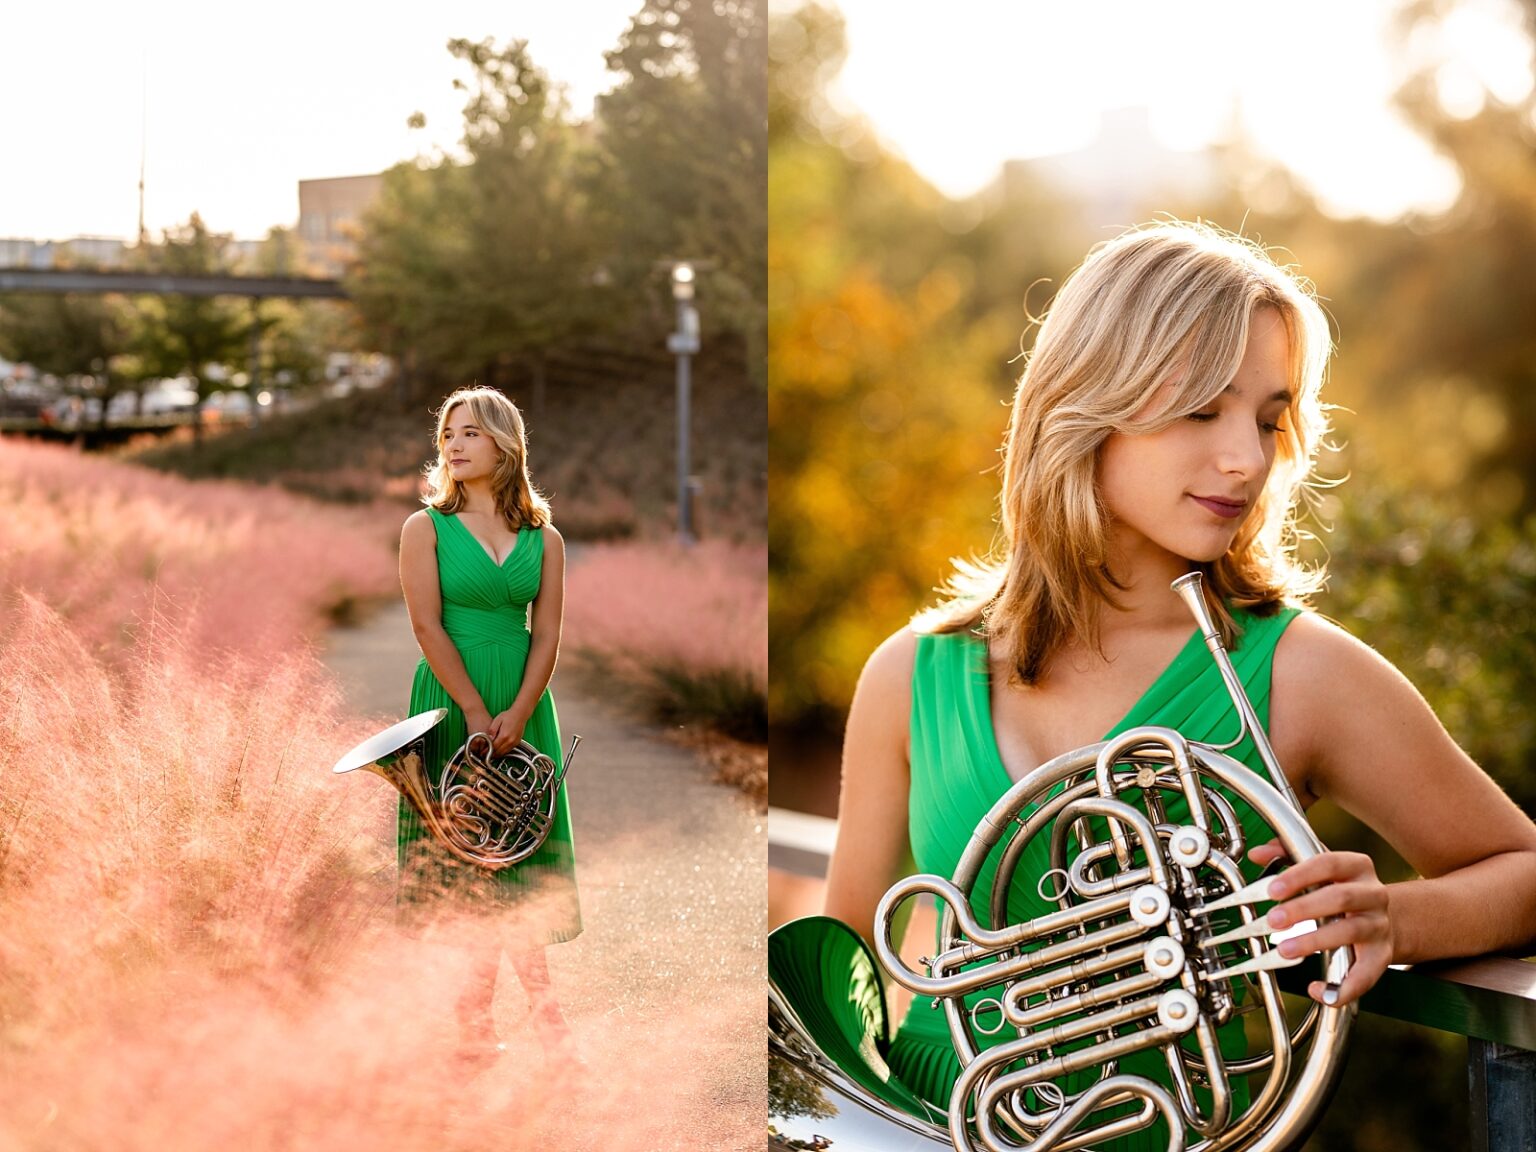 Senior pictures in Birmingham Alabama at Railroad Park. Downtown senior photos. Senior photos of musician with French horn.